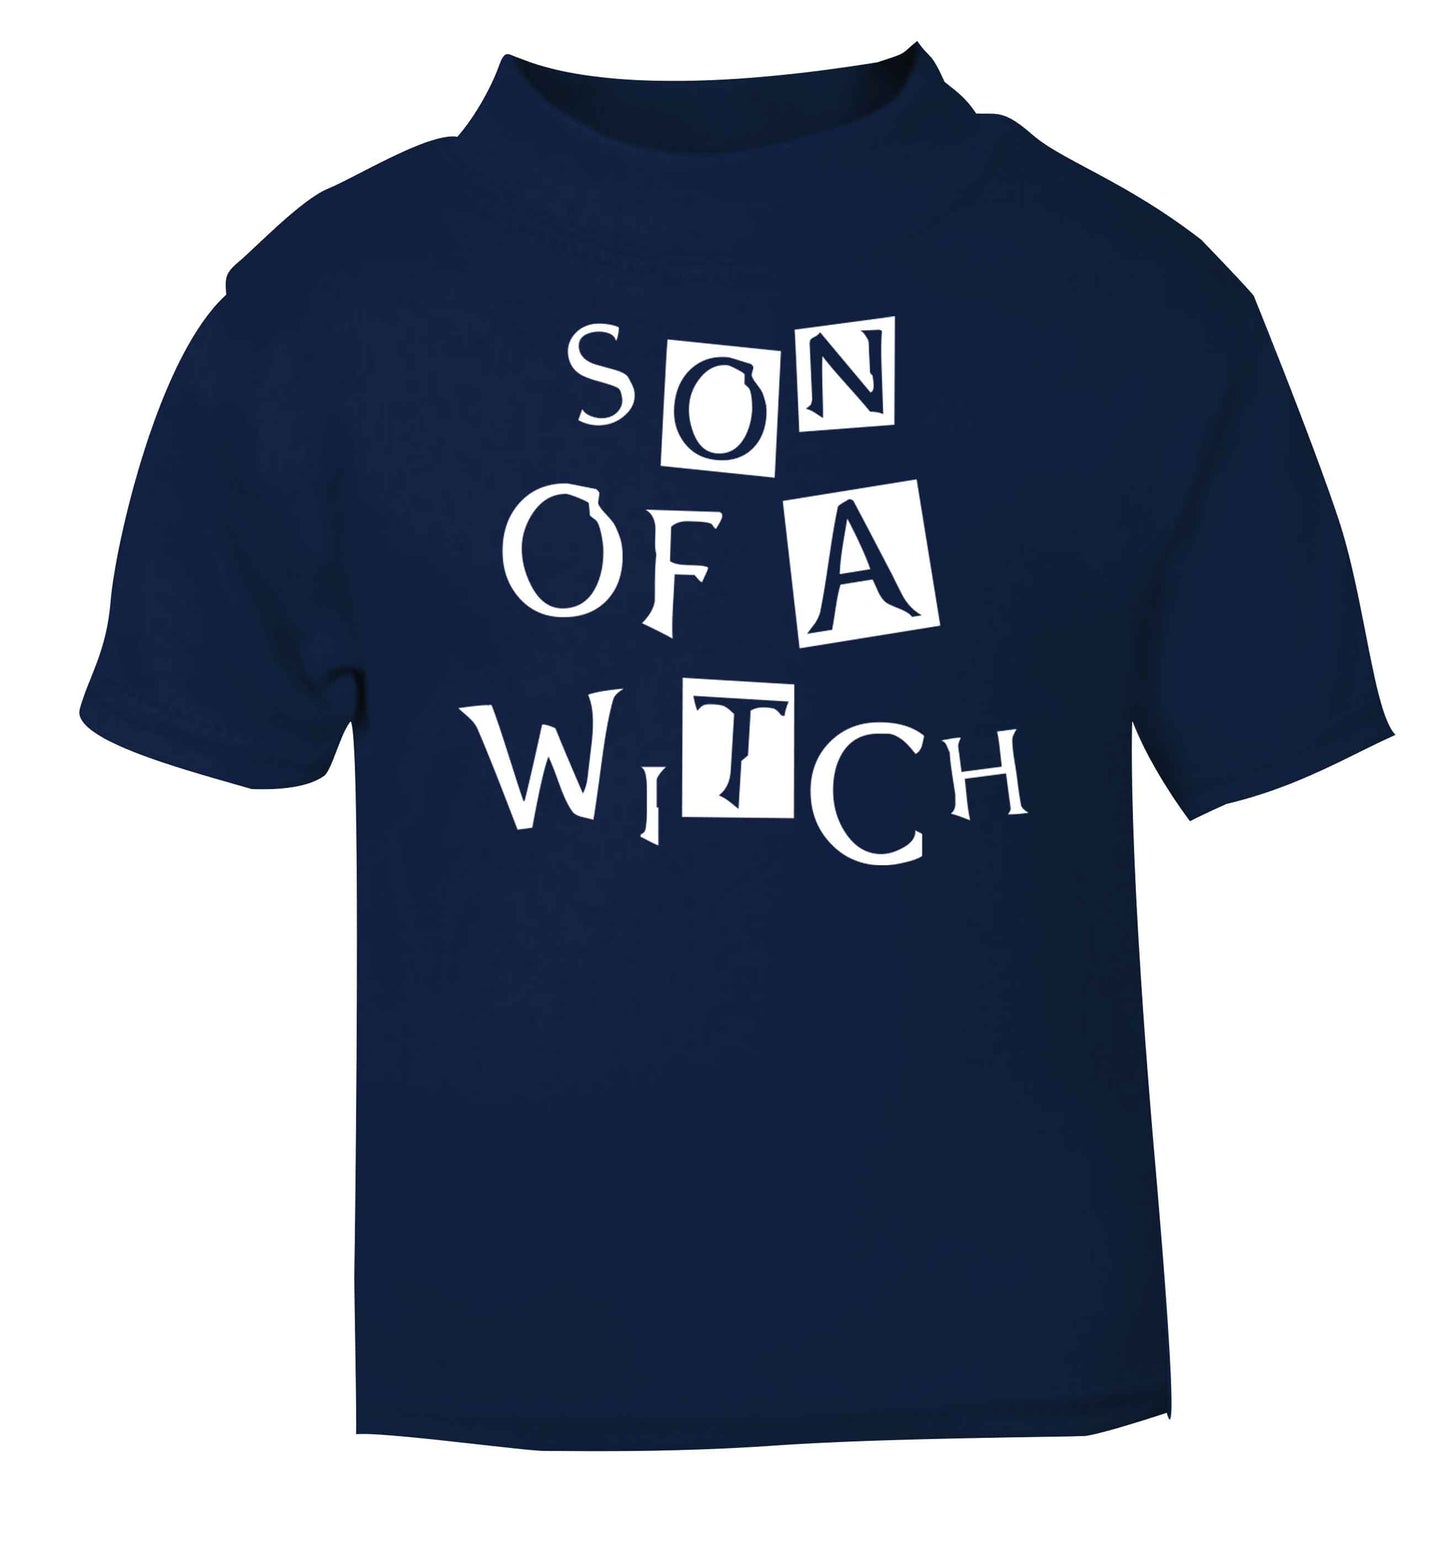 Son of a witch navy baby toddler Tshirt 2 Years